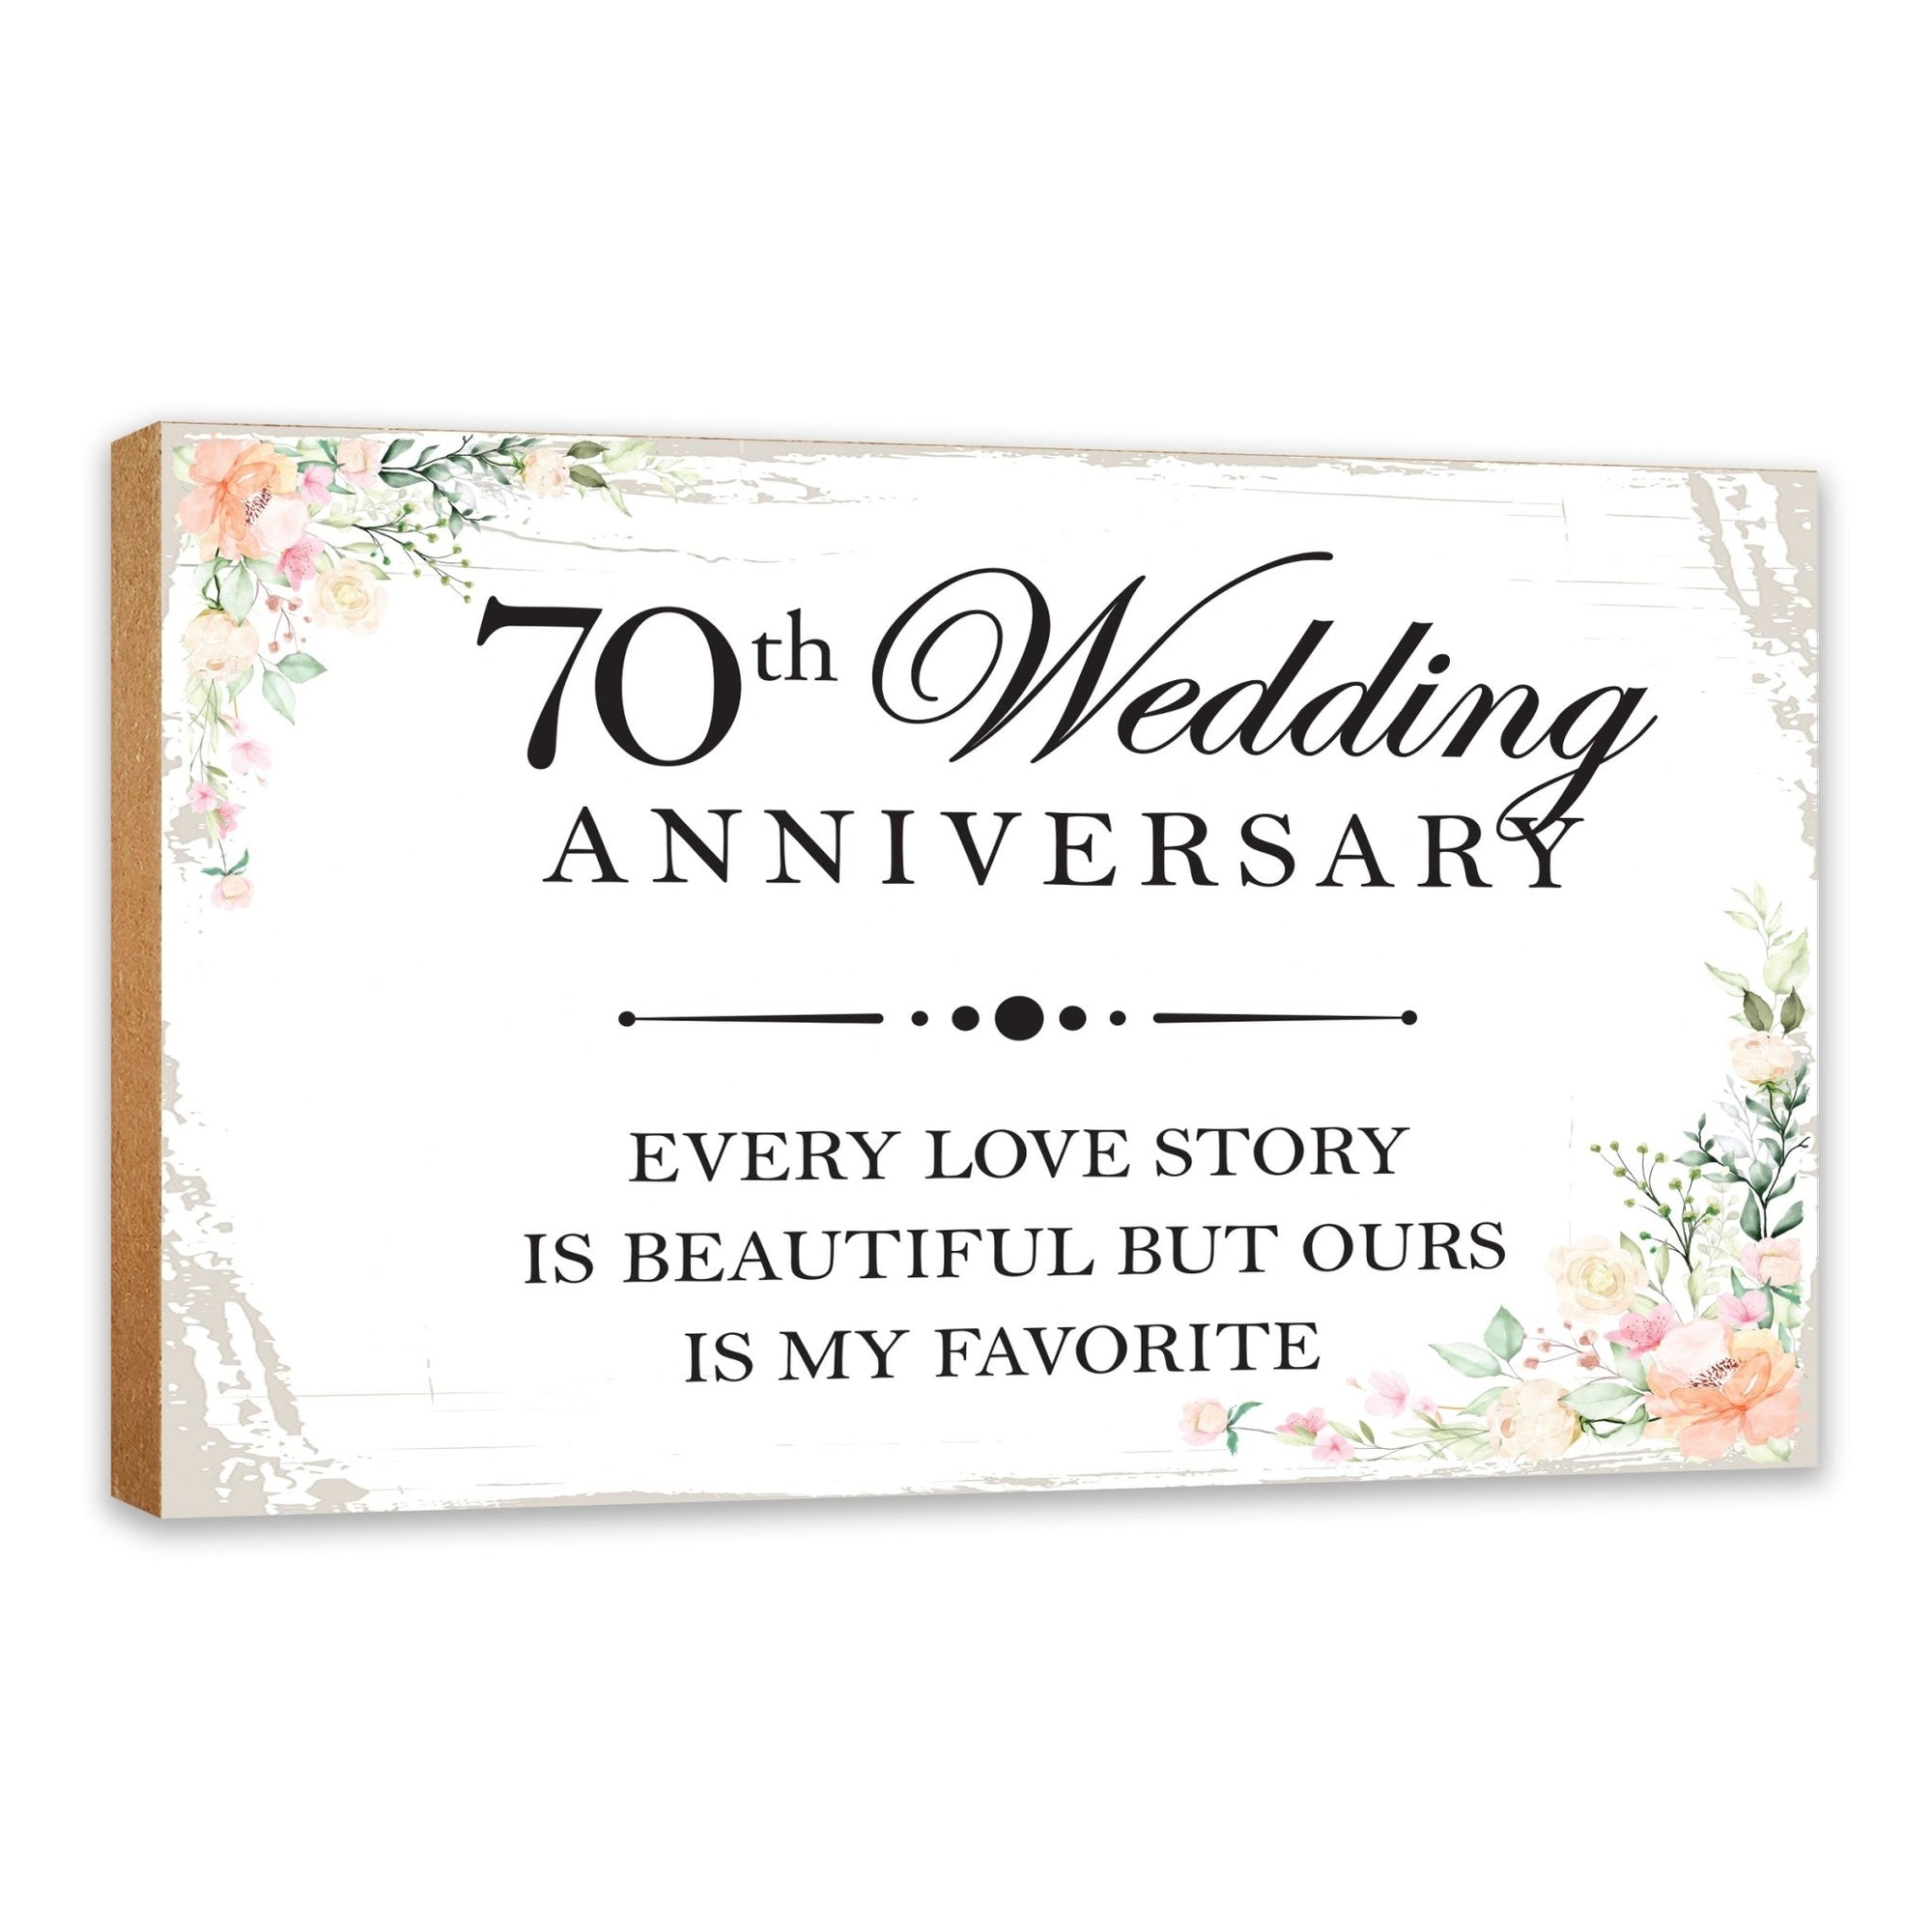 70th Wedding Anniversary Unique Shelf Decor and Tabletop Signs Gift for Couples - Every Love Story - LifeSong Milestones